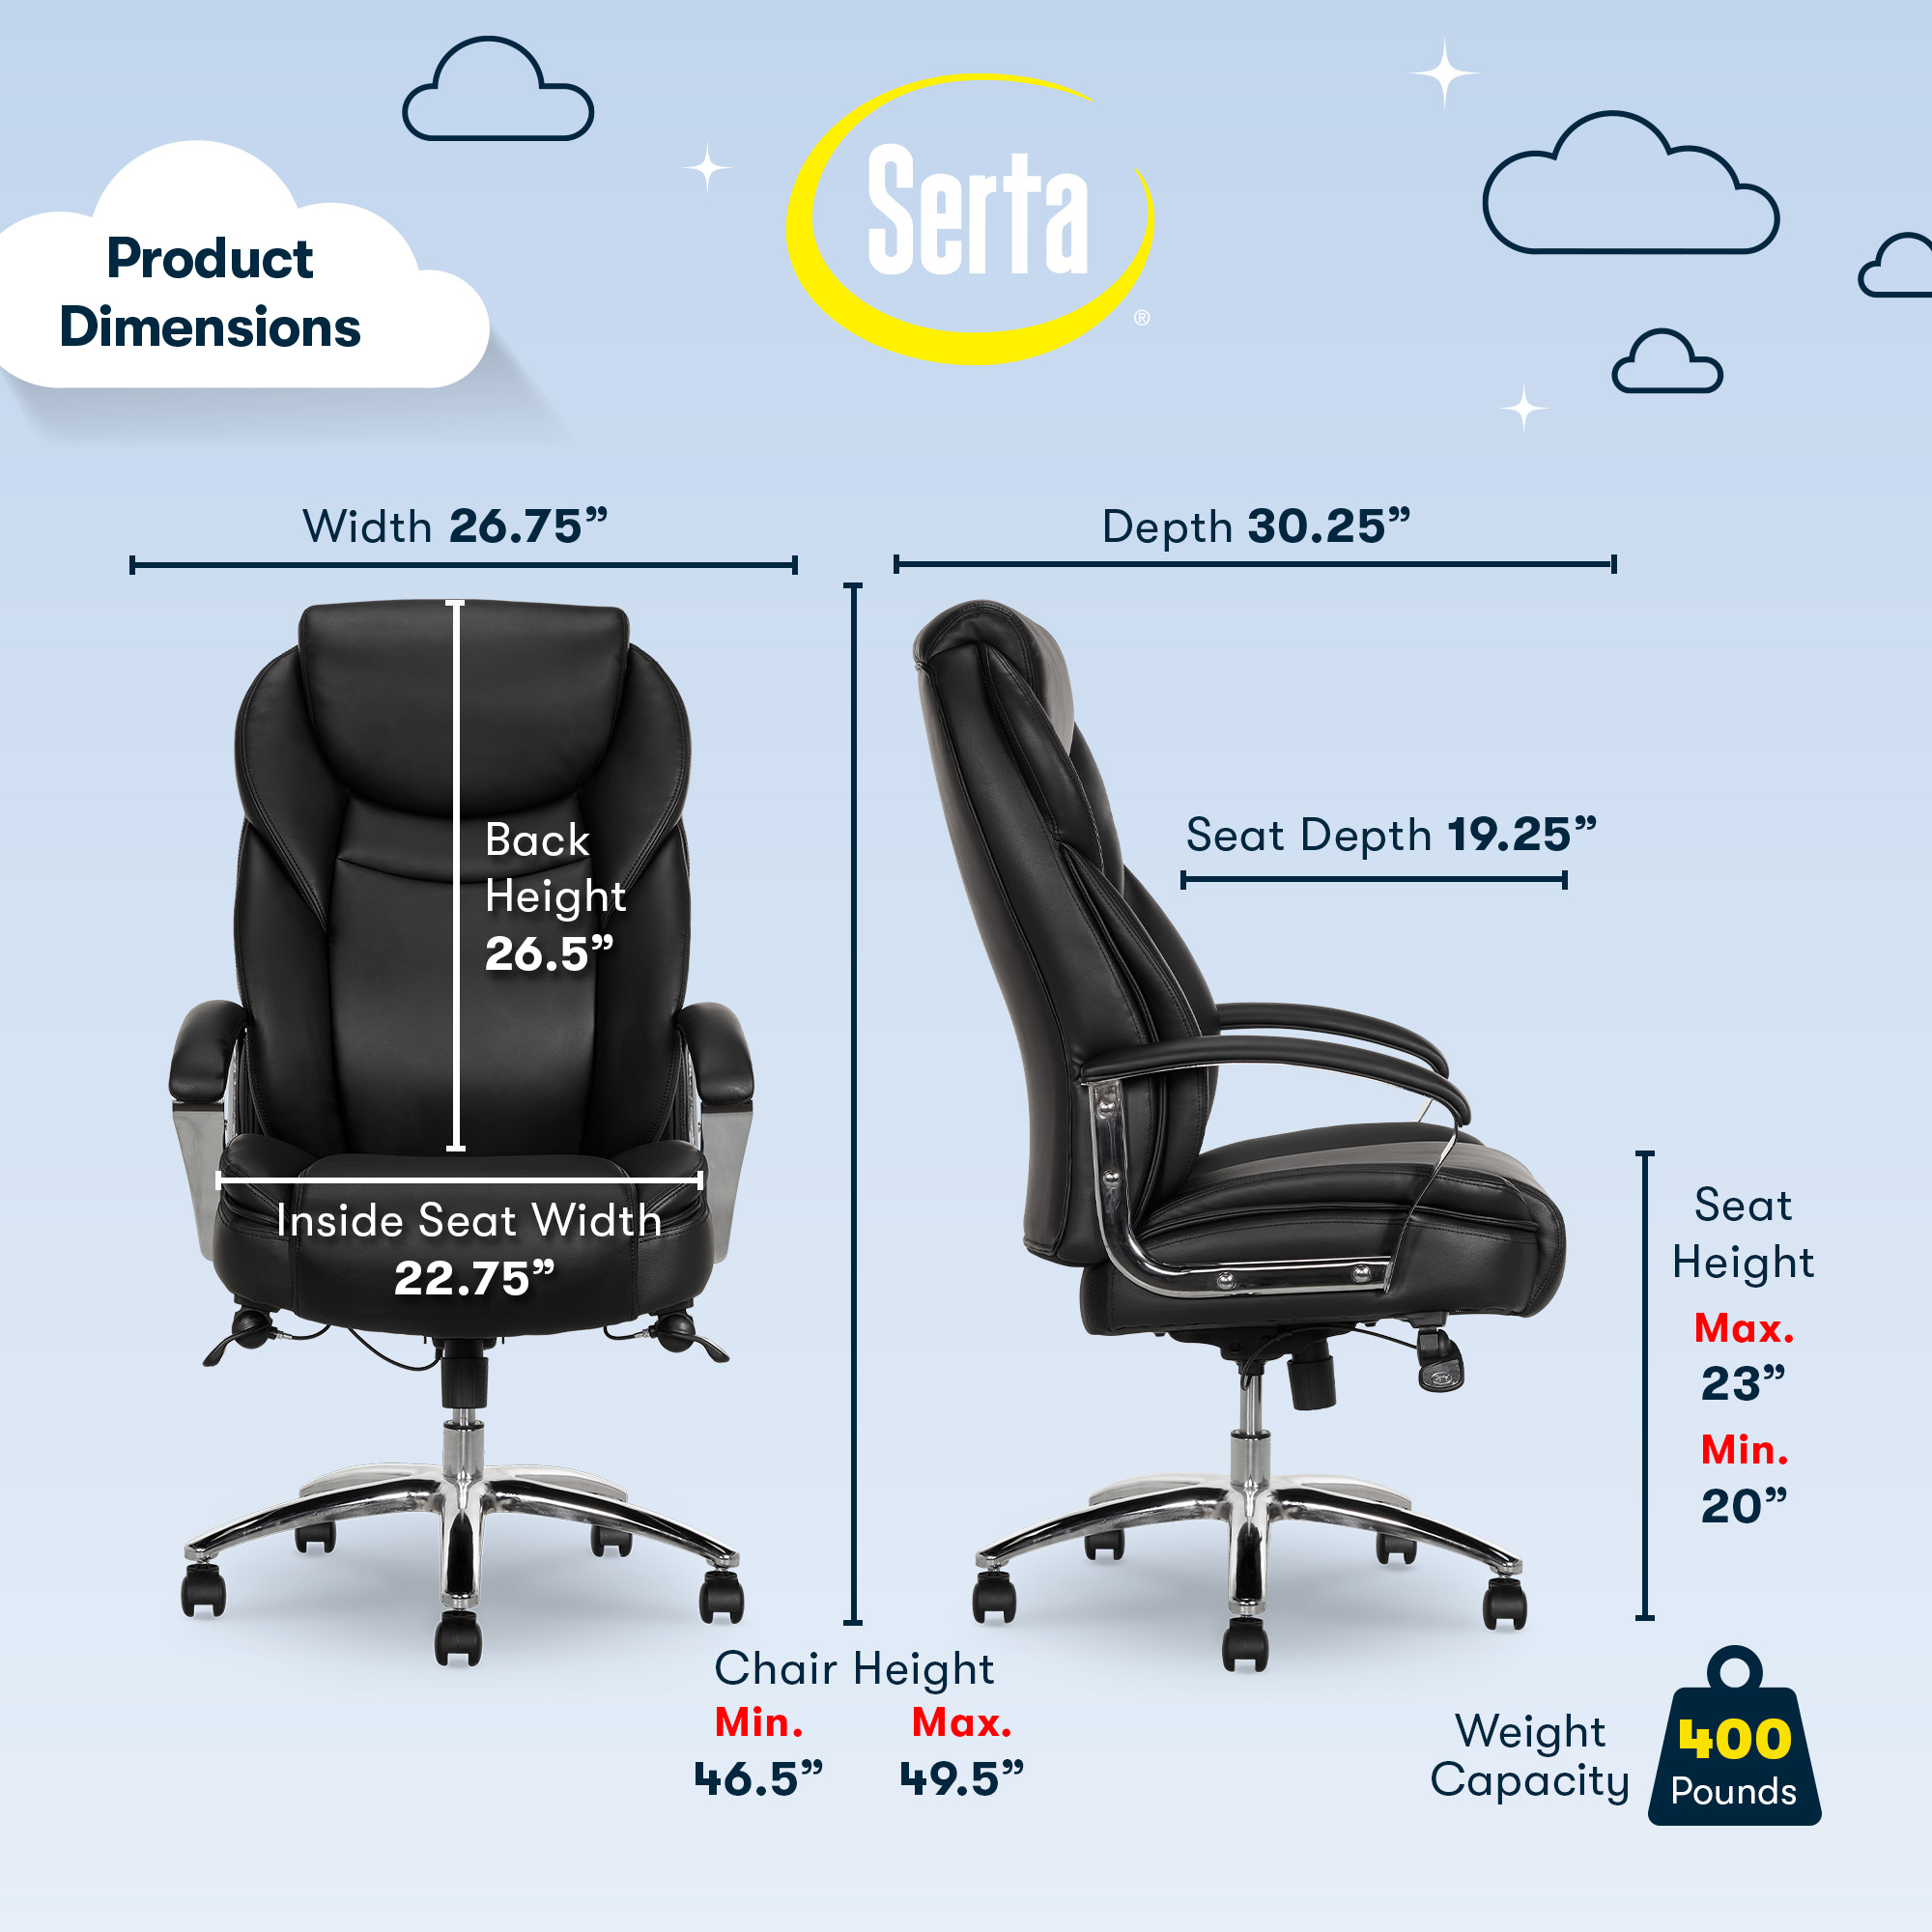 Serta Big & Tall High Back Office Chair, Heavy Duty Weight Rating, Black Bonded Leather Upholstery - image 3 of 12